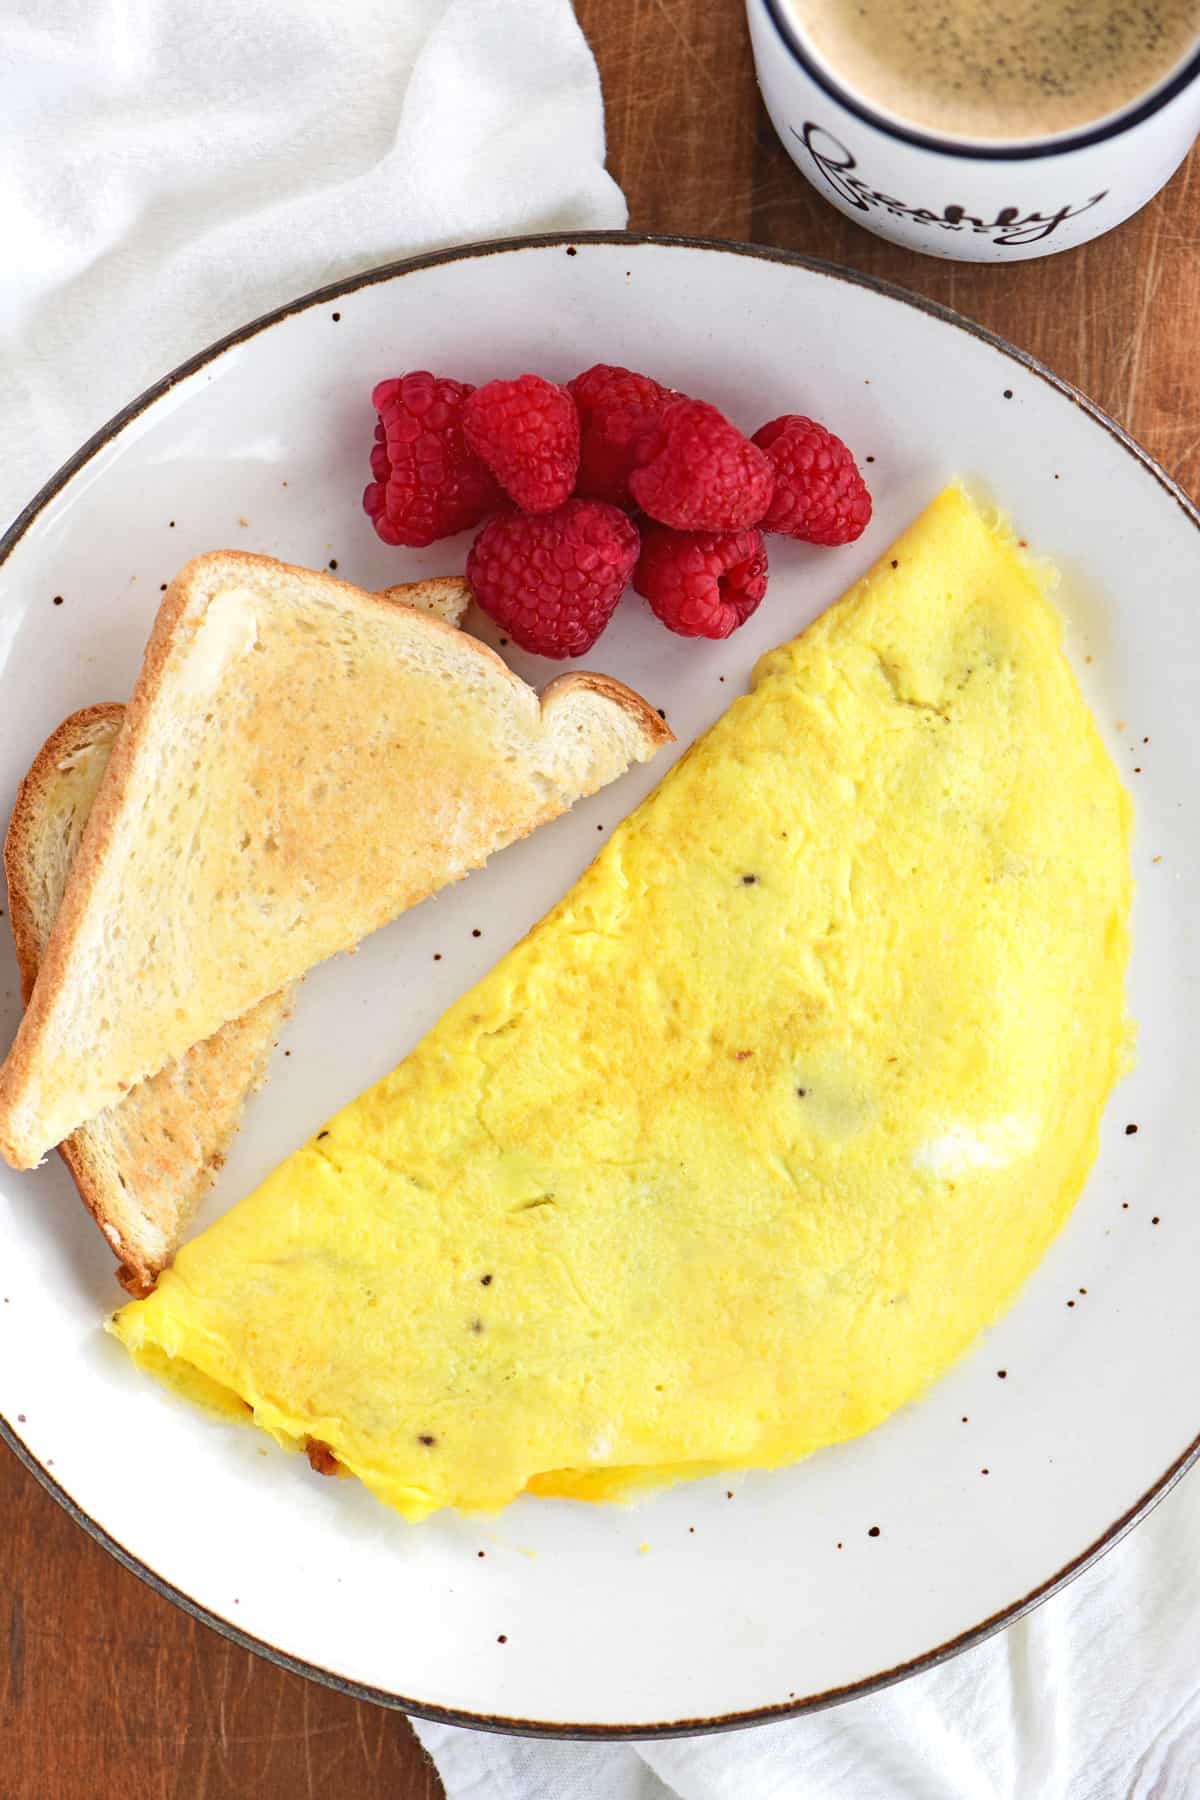 a plate with toast, an omelet, and berries on it.